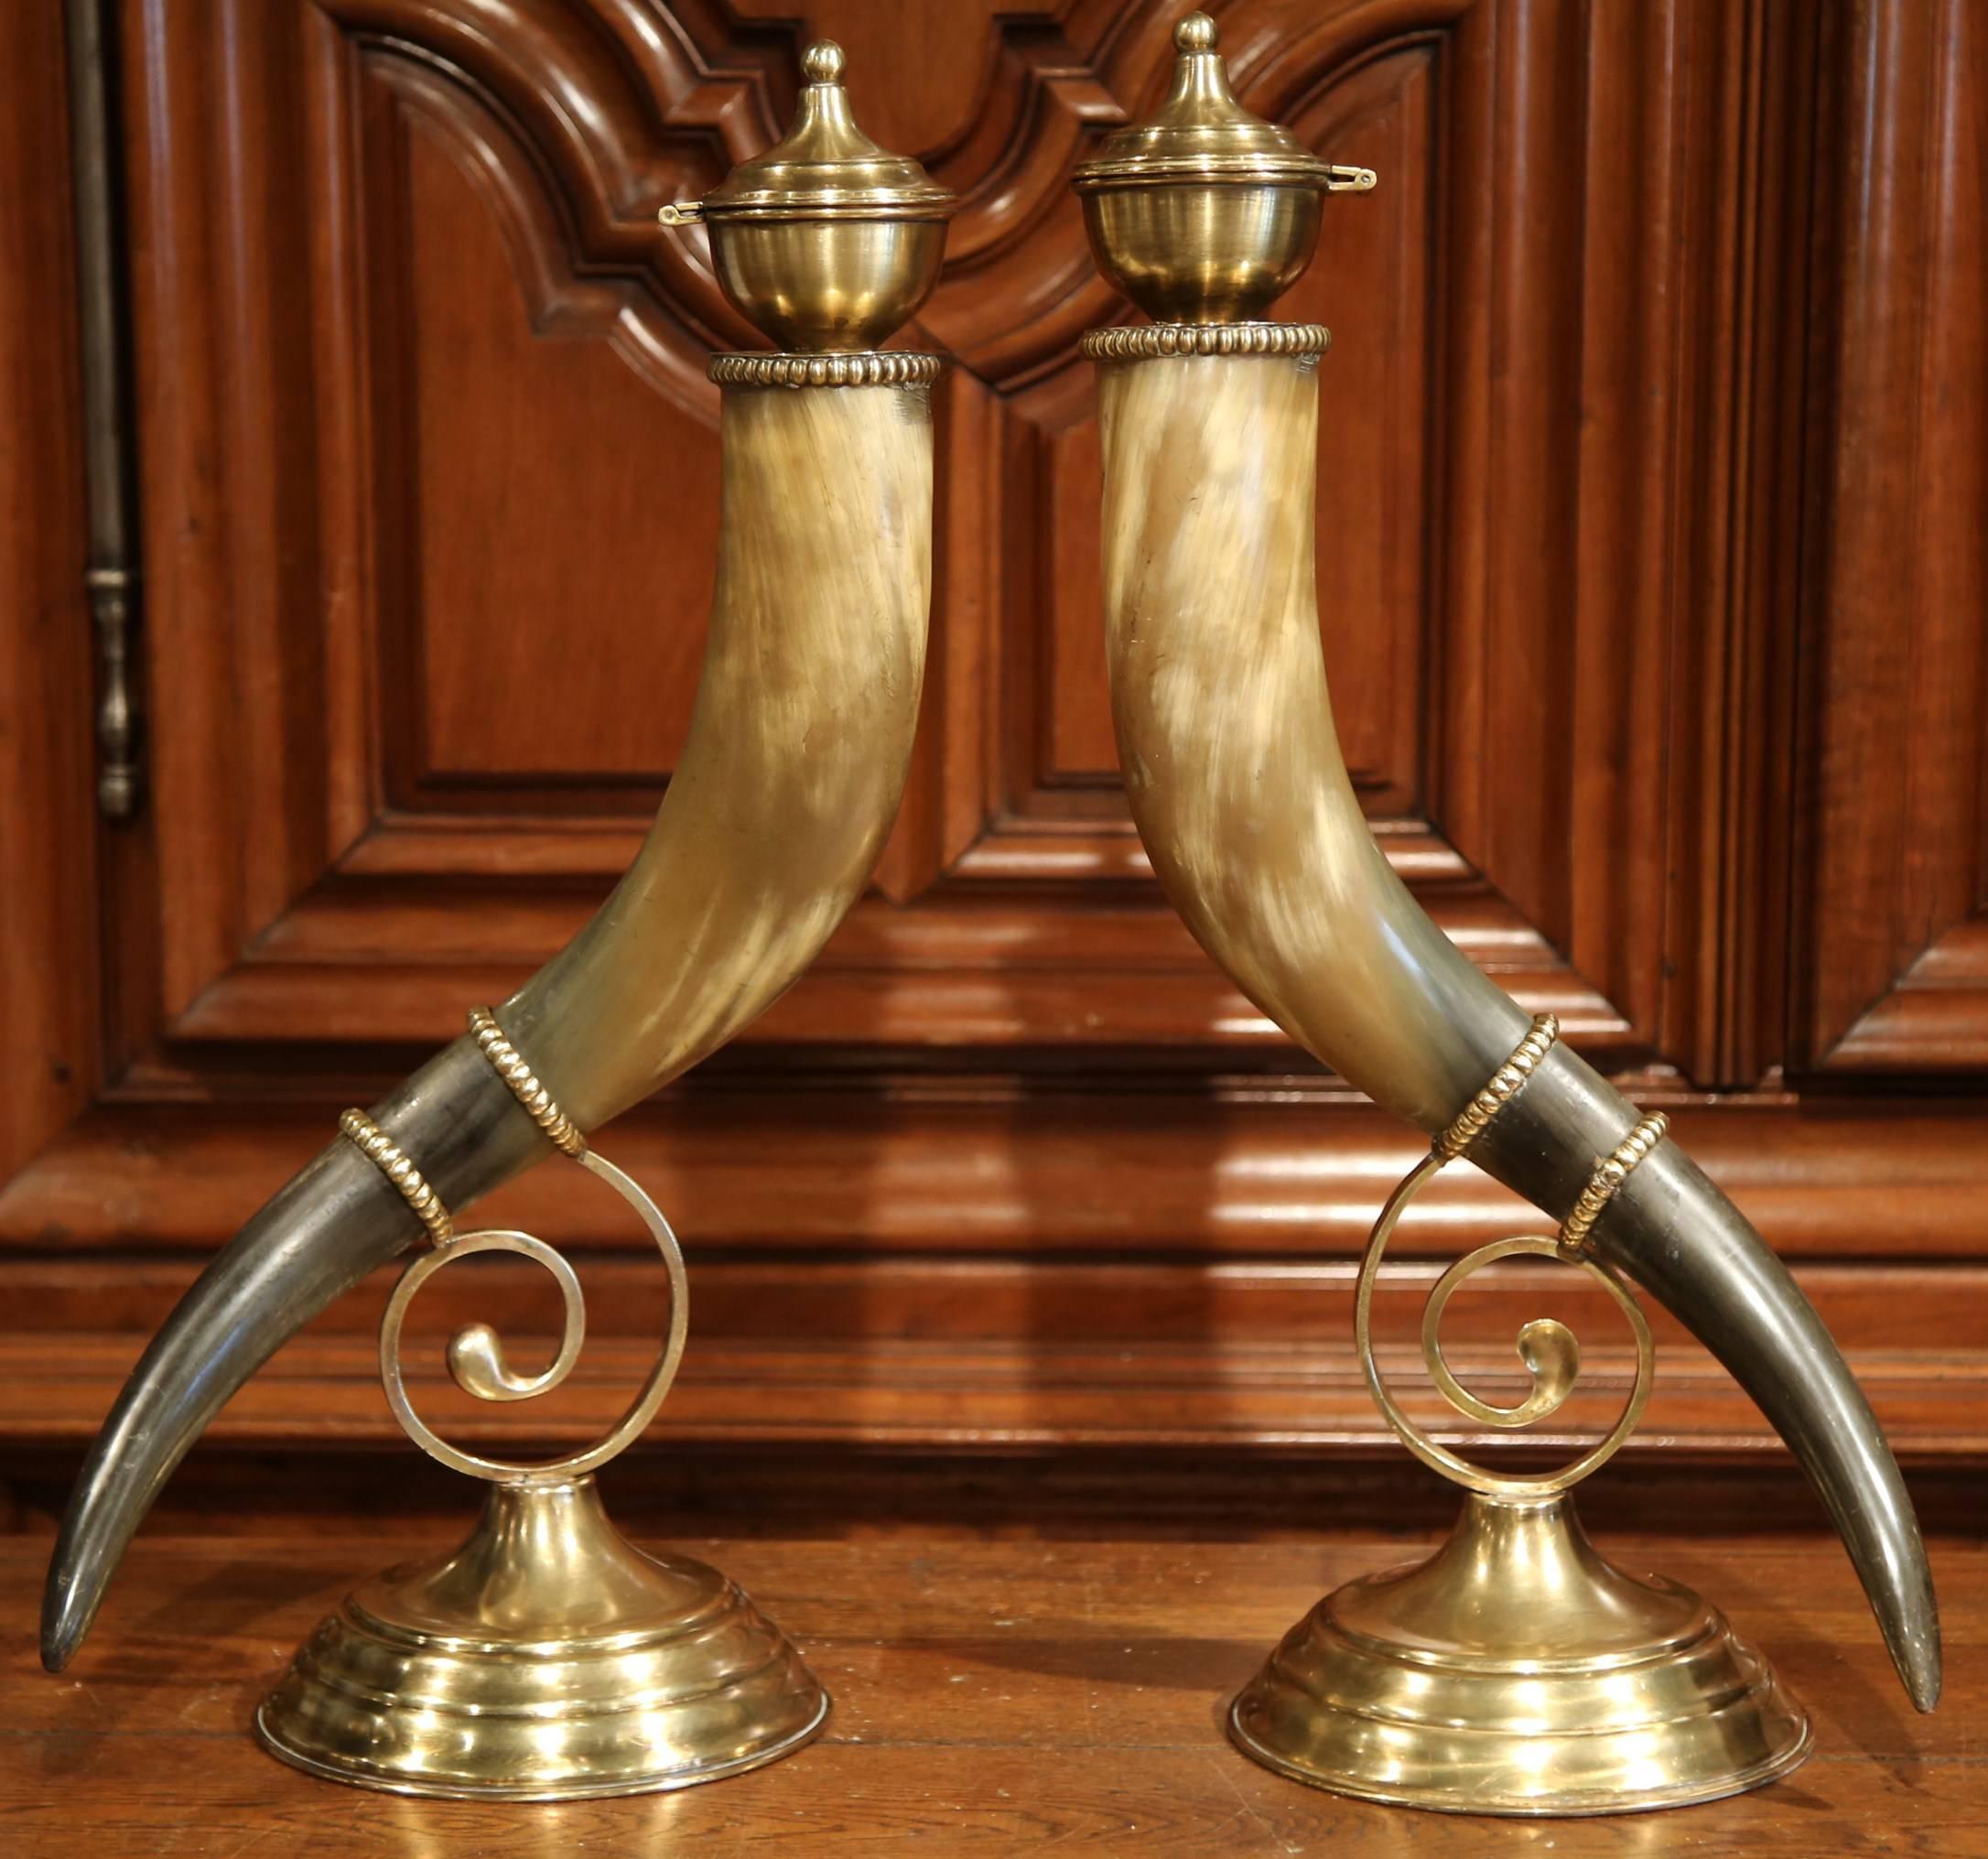 Hand-Crafted Pair of 19th Century French Horns Cornucopia Vases on Brass Mounts Stands